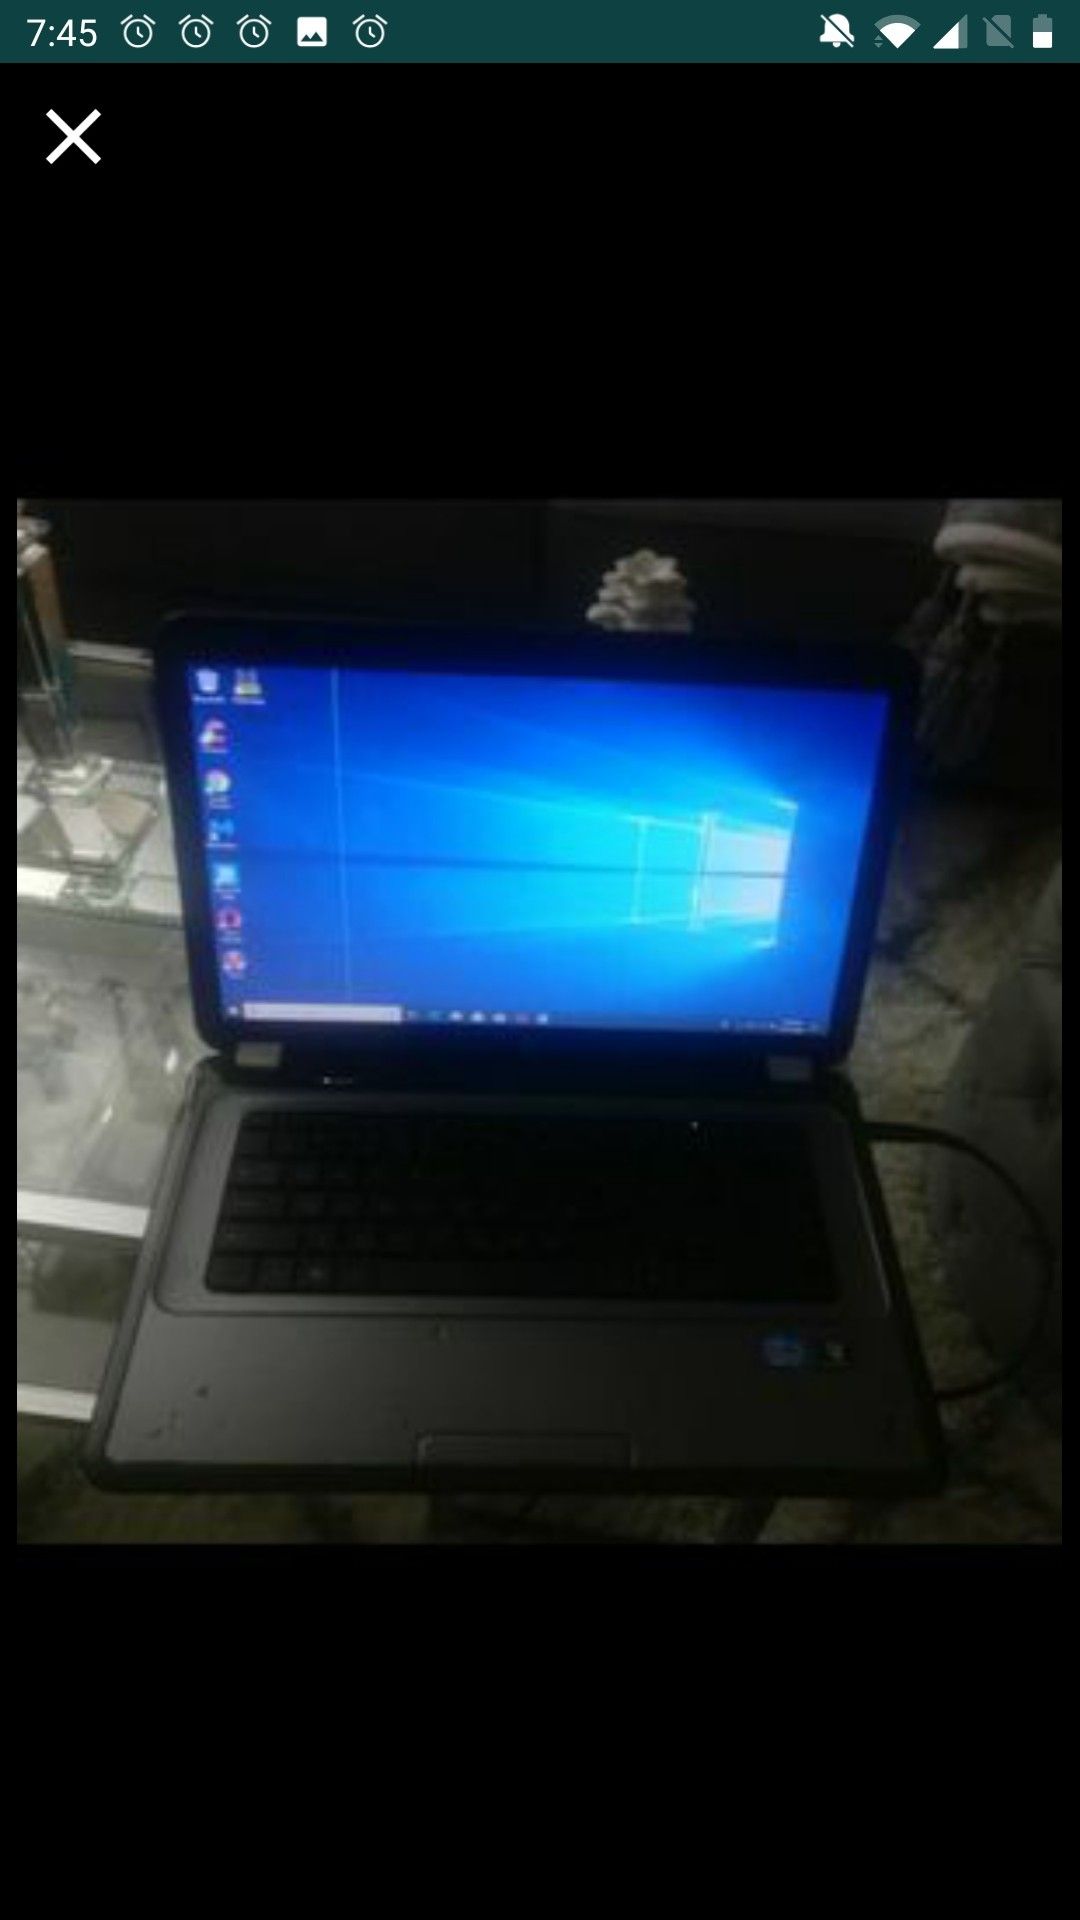 Hp laptop for sale i5, 6gb, 640gb HDD, fan & battery problem and line on screen